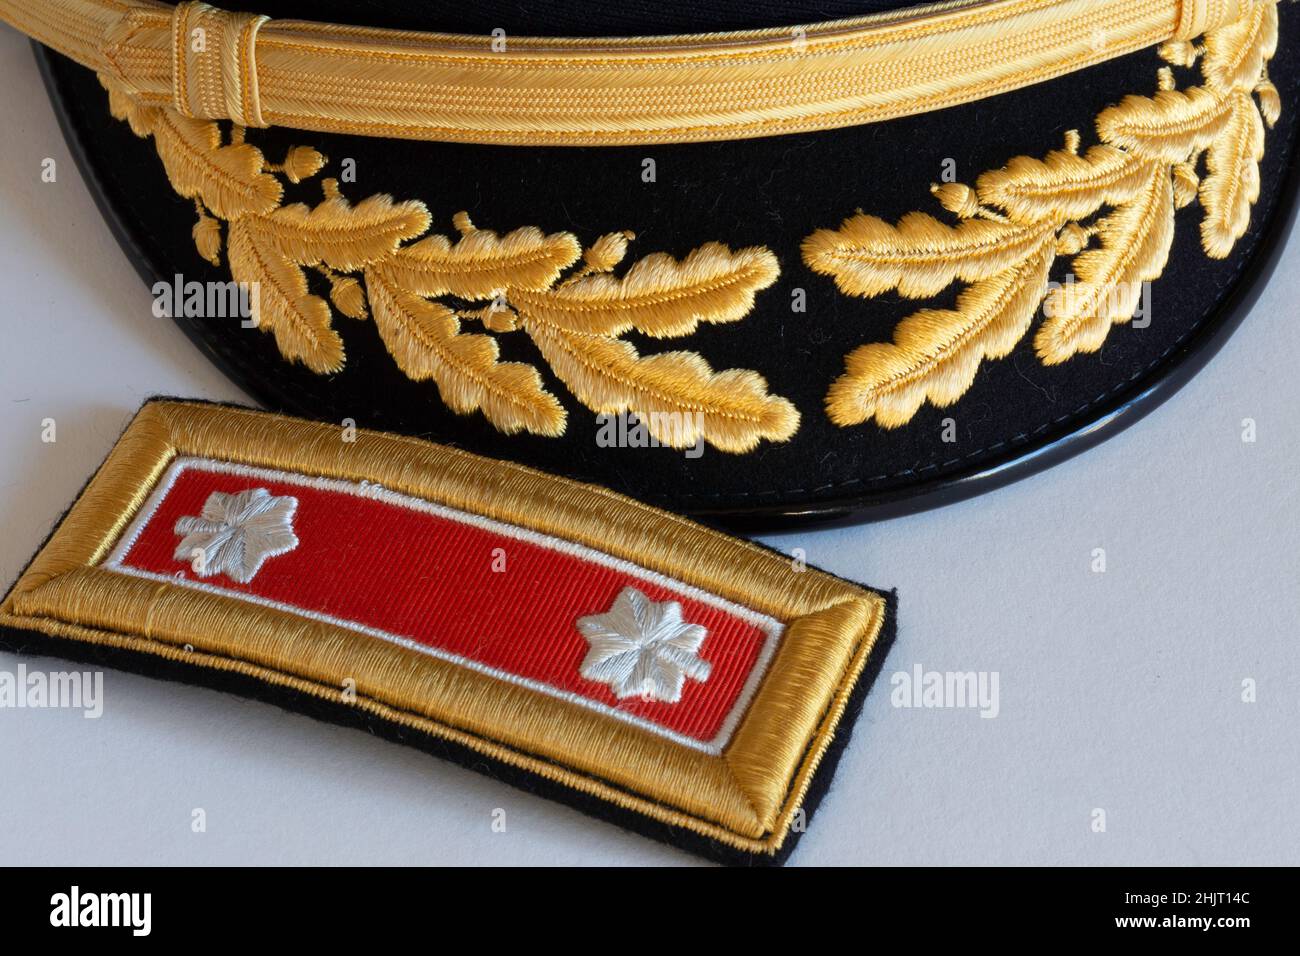 U.S. Army lieutenant colonel's hat and dress blues shoulder board for a signal corps officer, still life, USA Stock Photo